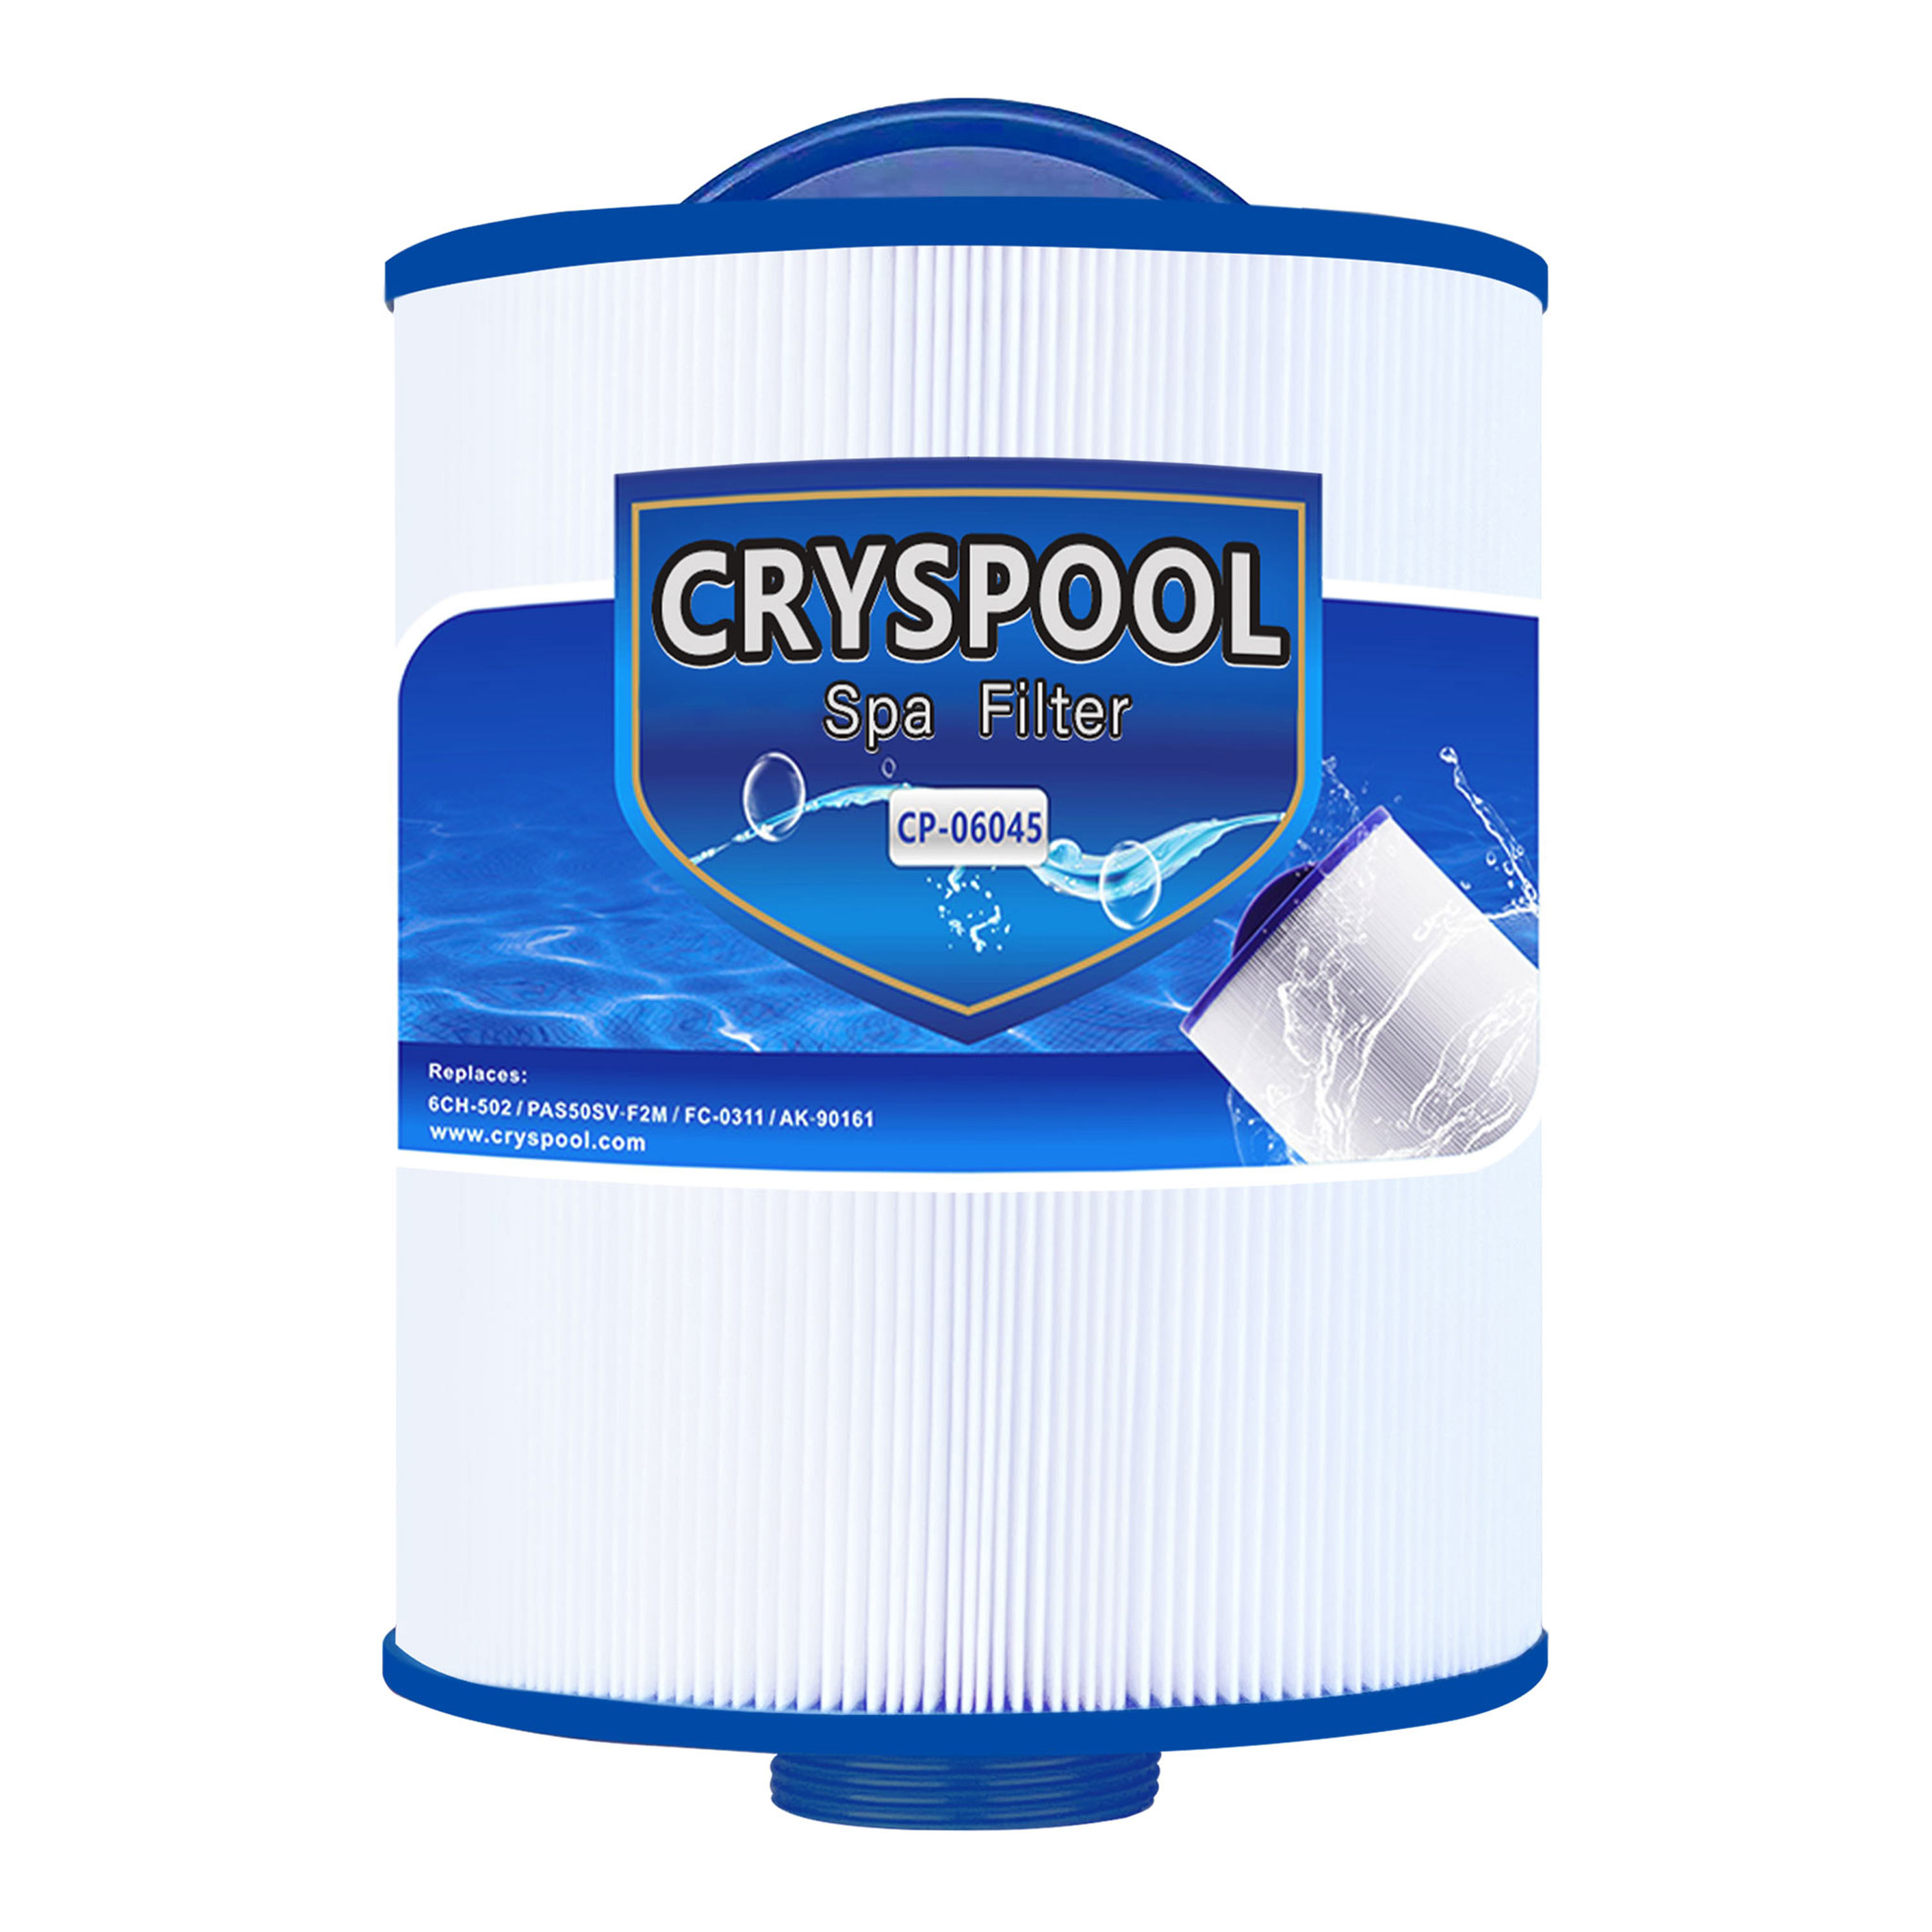 Super Purchasing for Cleverspa Inyo Filters - Cryspool Spa Filter Compatible with Artesian Spas, Tidal Fit Swim 06-0006-12, 06-0005-12,Unicel 6CH-502, PAS50SV-F2M, Filbur FC-0311, 50 sq.ft, –...